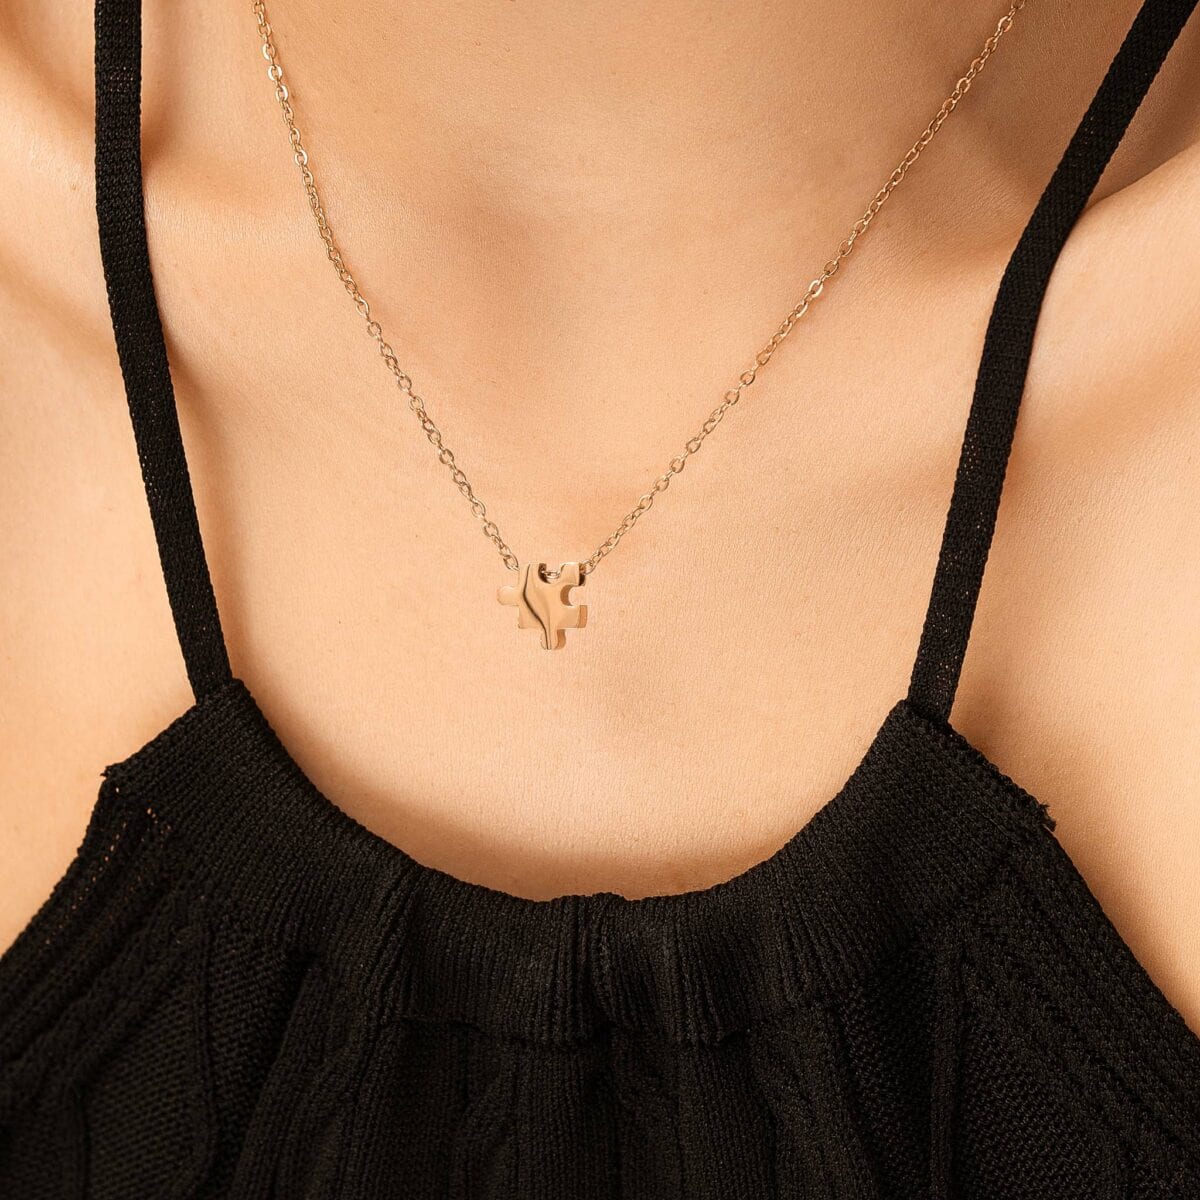 https://m.clubbella.co/product/duna-rose-gold-puzzle-charm-necklace/ Duna Puzzle Rose Gold Charm Necklace (2)